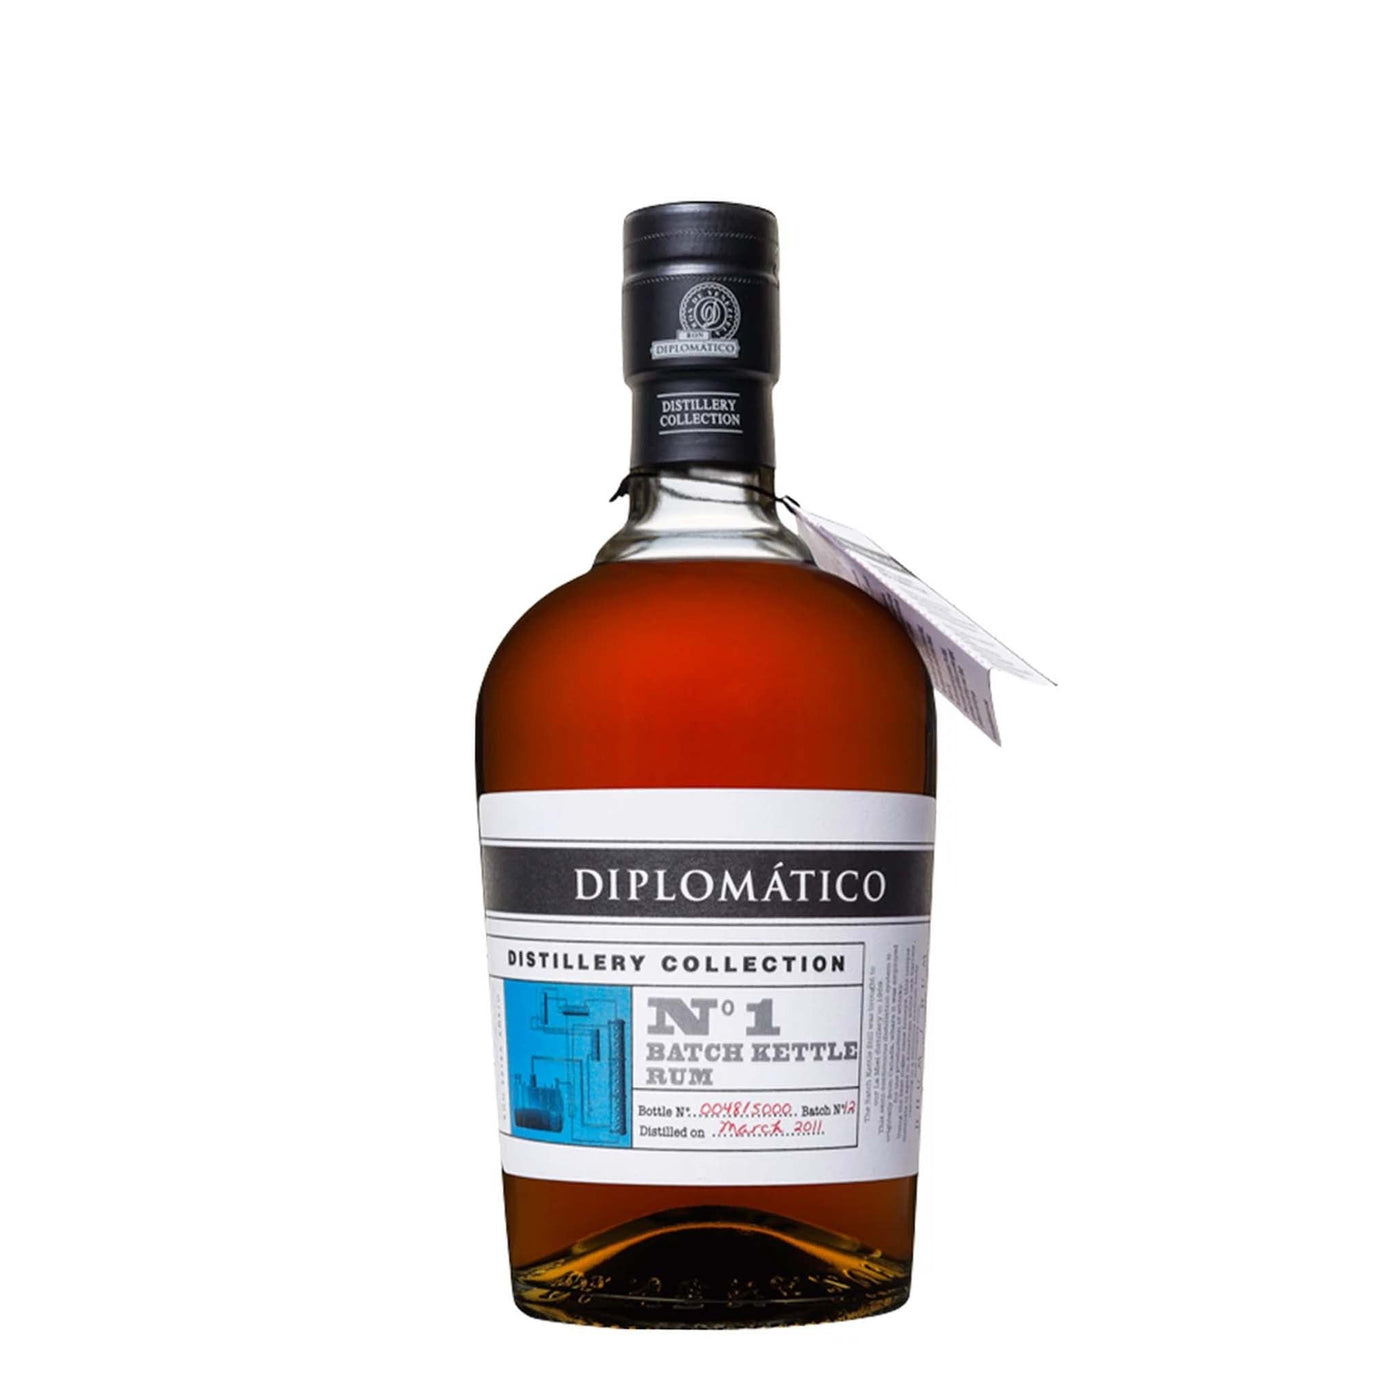 Diplomatico Number 1 Batch Kettle Rum